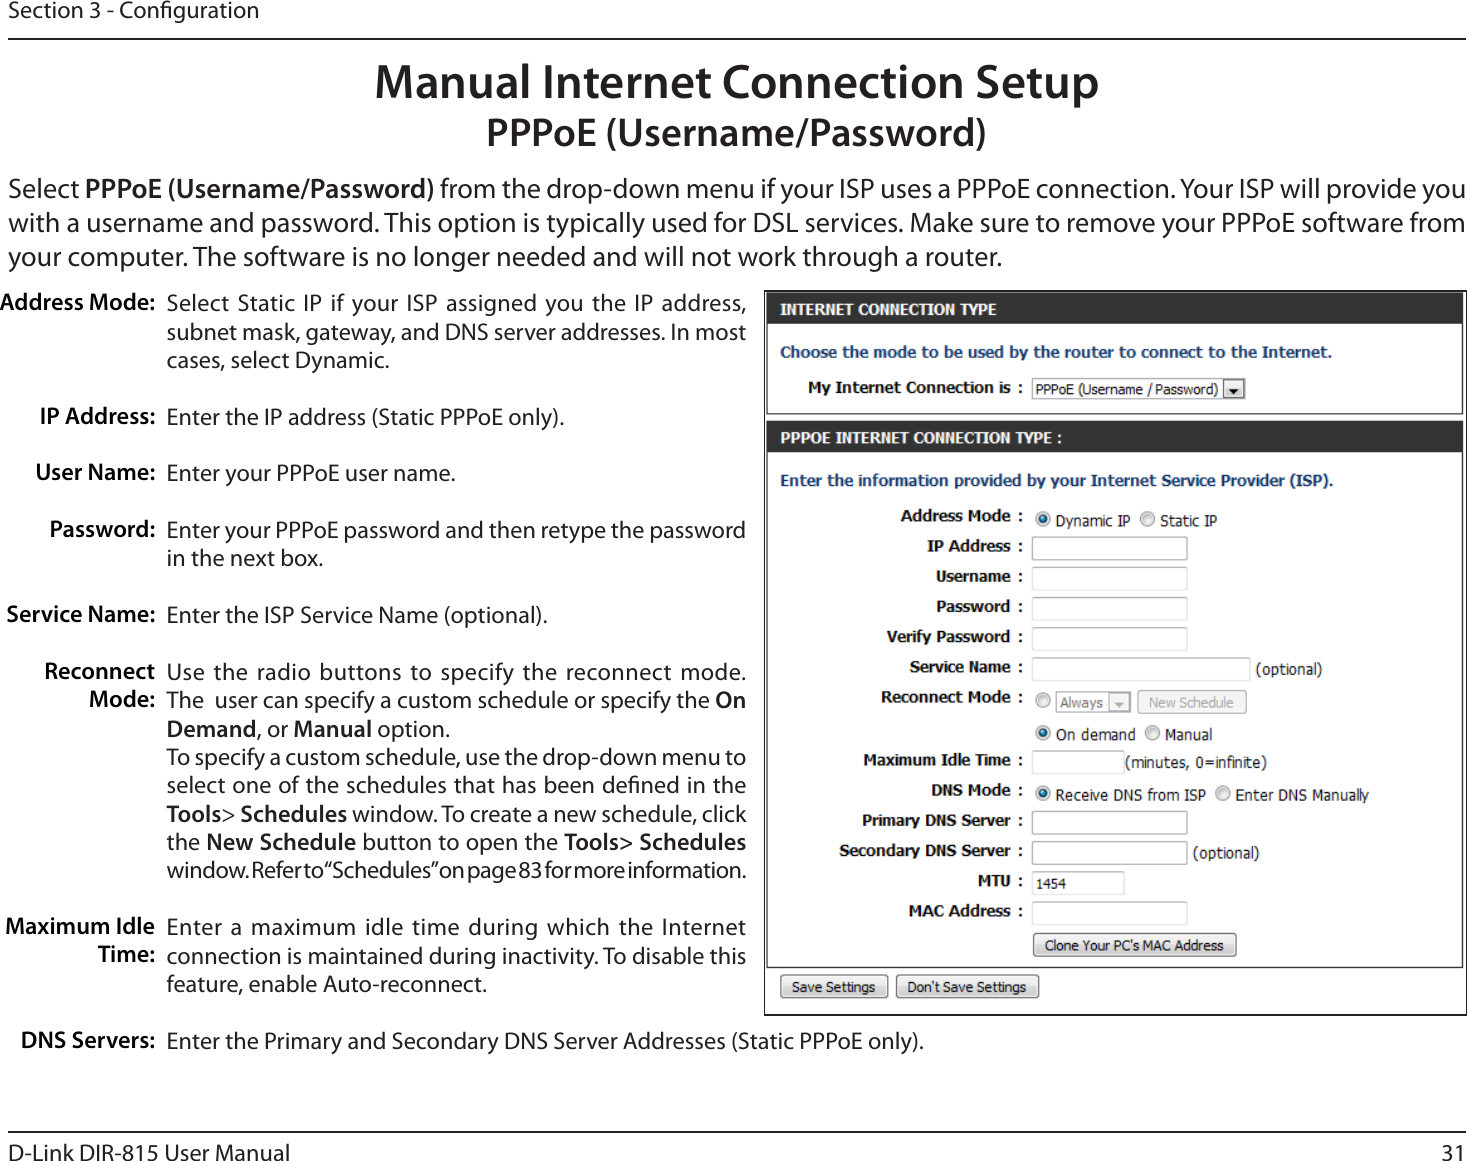 31D-Link DIR-815 User ManualSection 3 - CongurationSelect Static IP if your ISP assigned you the IP address, subnet mask, gateway, and DNS server addresses. In most cases, select Dynamic.Enter the IP address (Static PPPoE only).Enter your PPPoE user name.Enter your PPPoE password and then retype the password in the next box.Enter the ISP Service Name (optional).Use the radio buttons to specify the reconnect mode. The  user can specify a custom schedule or specify the On Demand, or Manual option.To specify a custom schedule, use the drop-down menu to select one of the schedules that has been dened in the Tools&gt; Schedules window. To create a new schedule, click the New Schedule button to open the Tools&gt; Schedules window. Refer to “Schedules” on page 83 for more information.Enter a maximum idle time during which the Internet connection is maintained during inactivity. To disable this feature, enable Auto-reconnect.Enter the Primary and Secondary DNS Server Addresses (Static PPPoE only).Address Mode:IP Address:User Name:Password:Service Name:Reconnect Mode:.BYJNVN*EMFTime:DNS Servers:Manual Internet Connection SetupPPPoE (Username/Password)Select PPPoE (Username/Password) GSPNUIFESPQEPXONFOVJGZPVS*41VTFTB111P&amp;DPOOFDUJPO:PVS*41XJMMQSPWJEFZPVwith a username and password. This option is typically used for DSL services. Make sure to remove your PPPoE software from your computer. The software is no longer needed and will not work through a router.